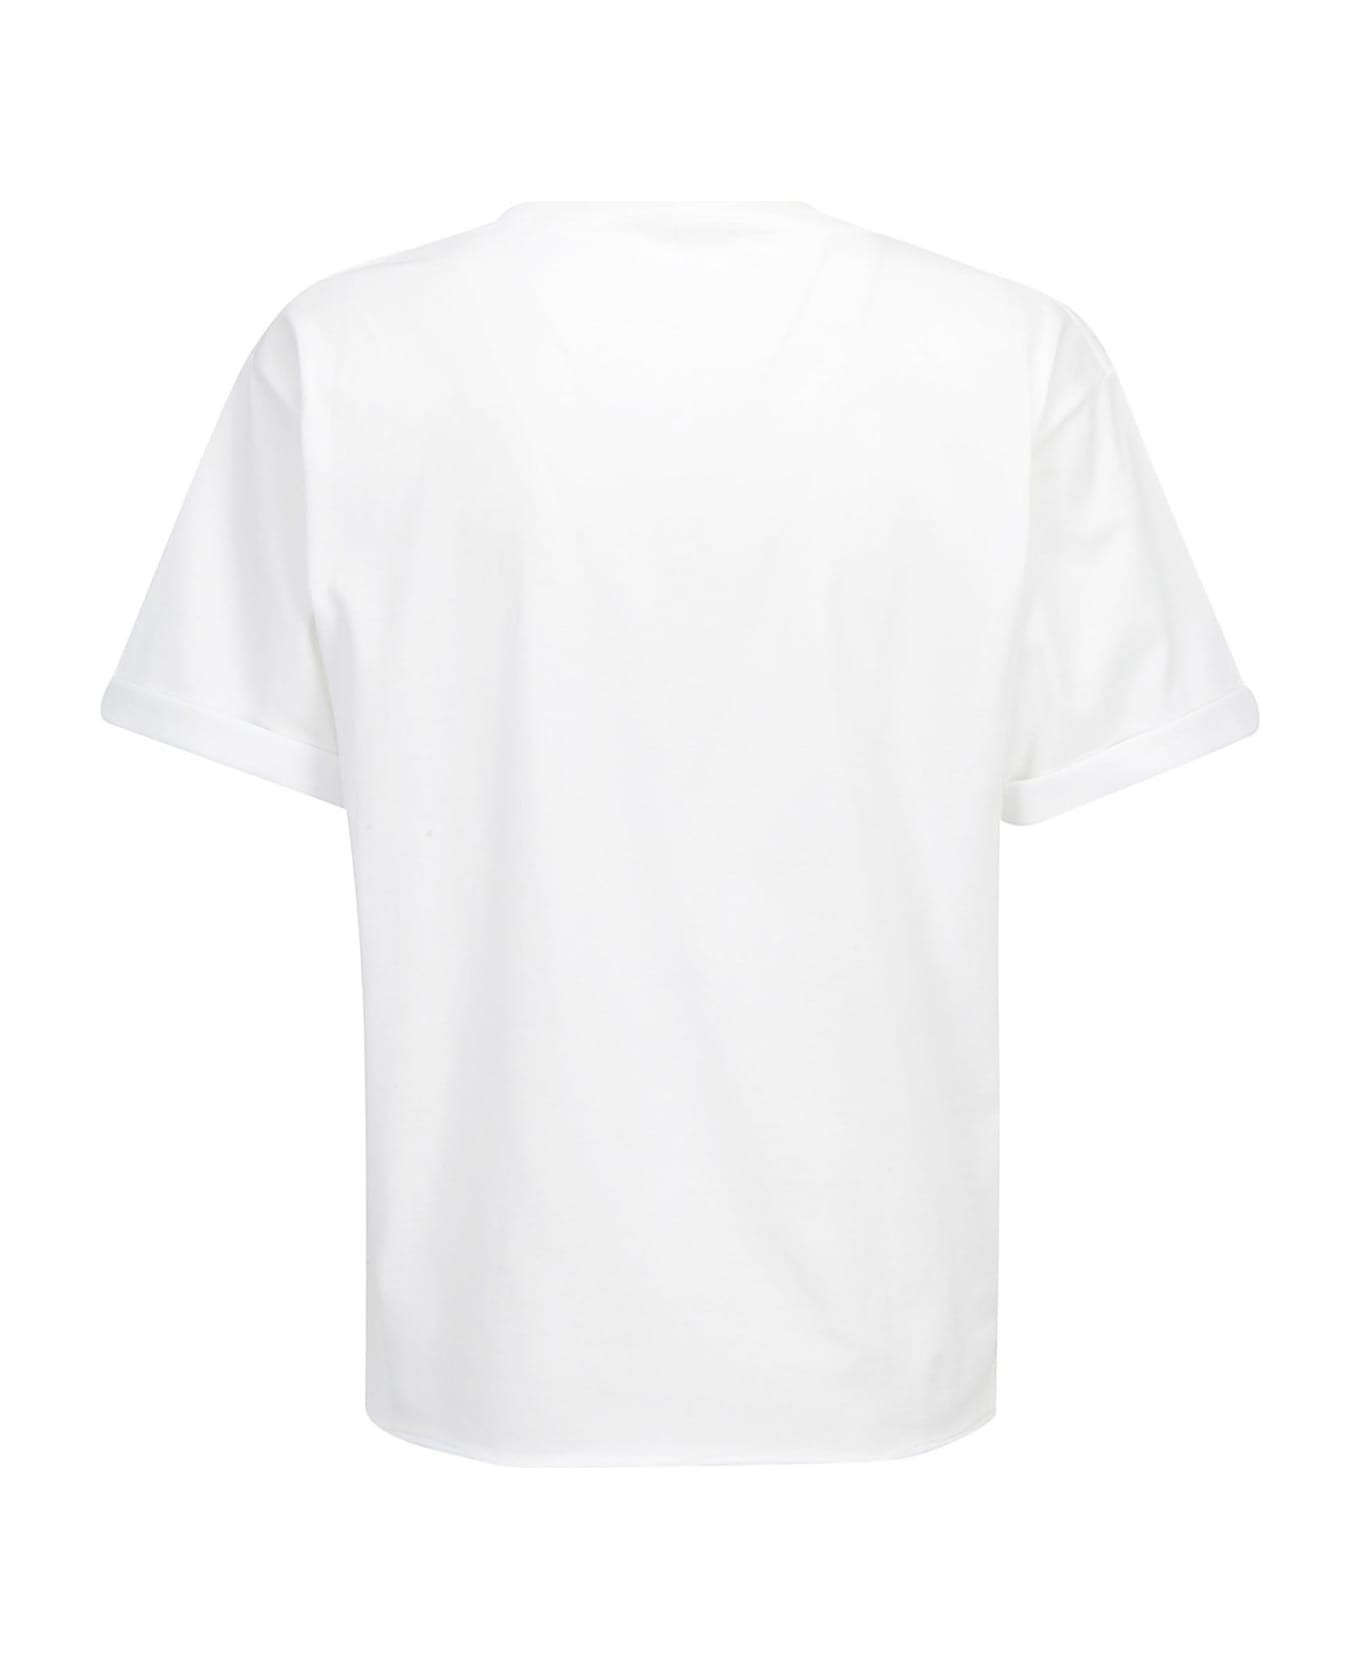 Saint Laurent Cotton T-shirt With Frontal Iconic Print - White